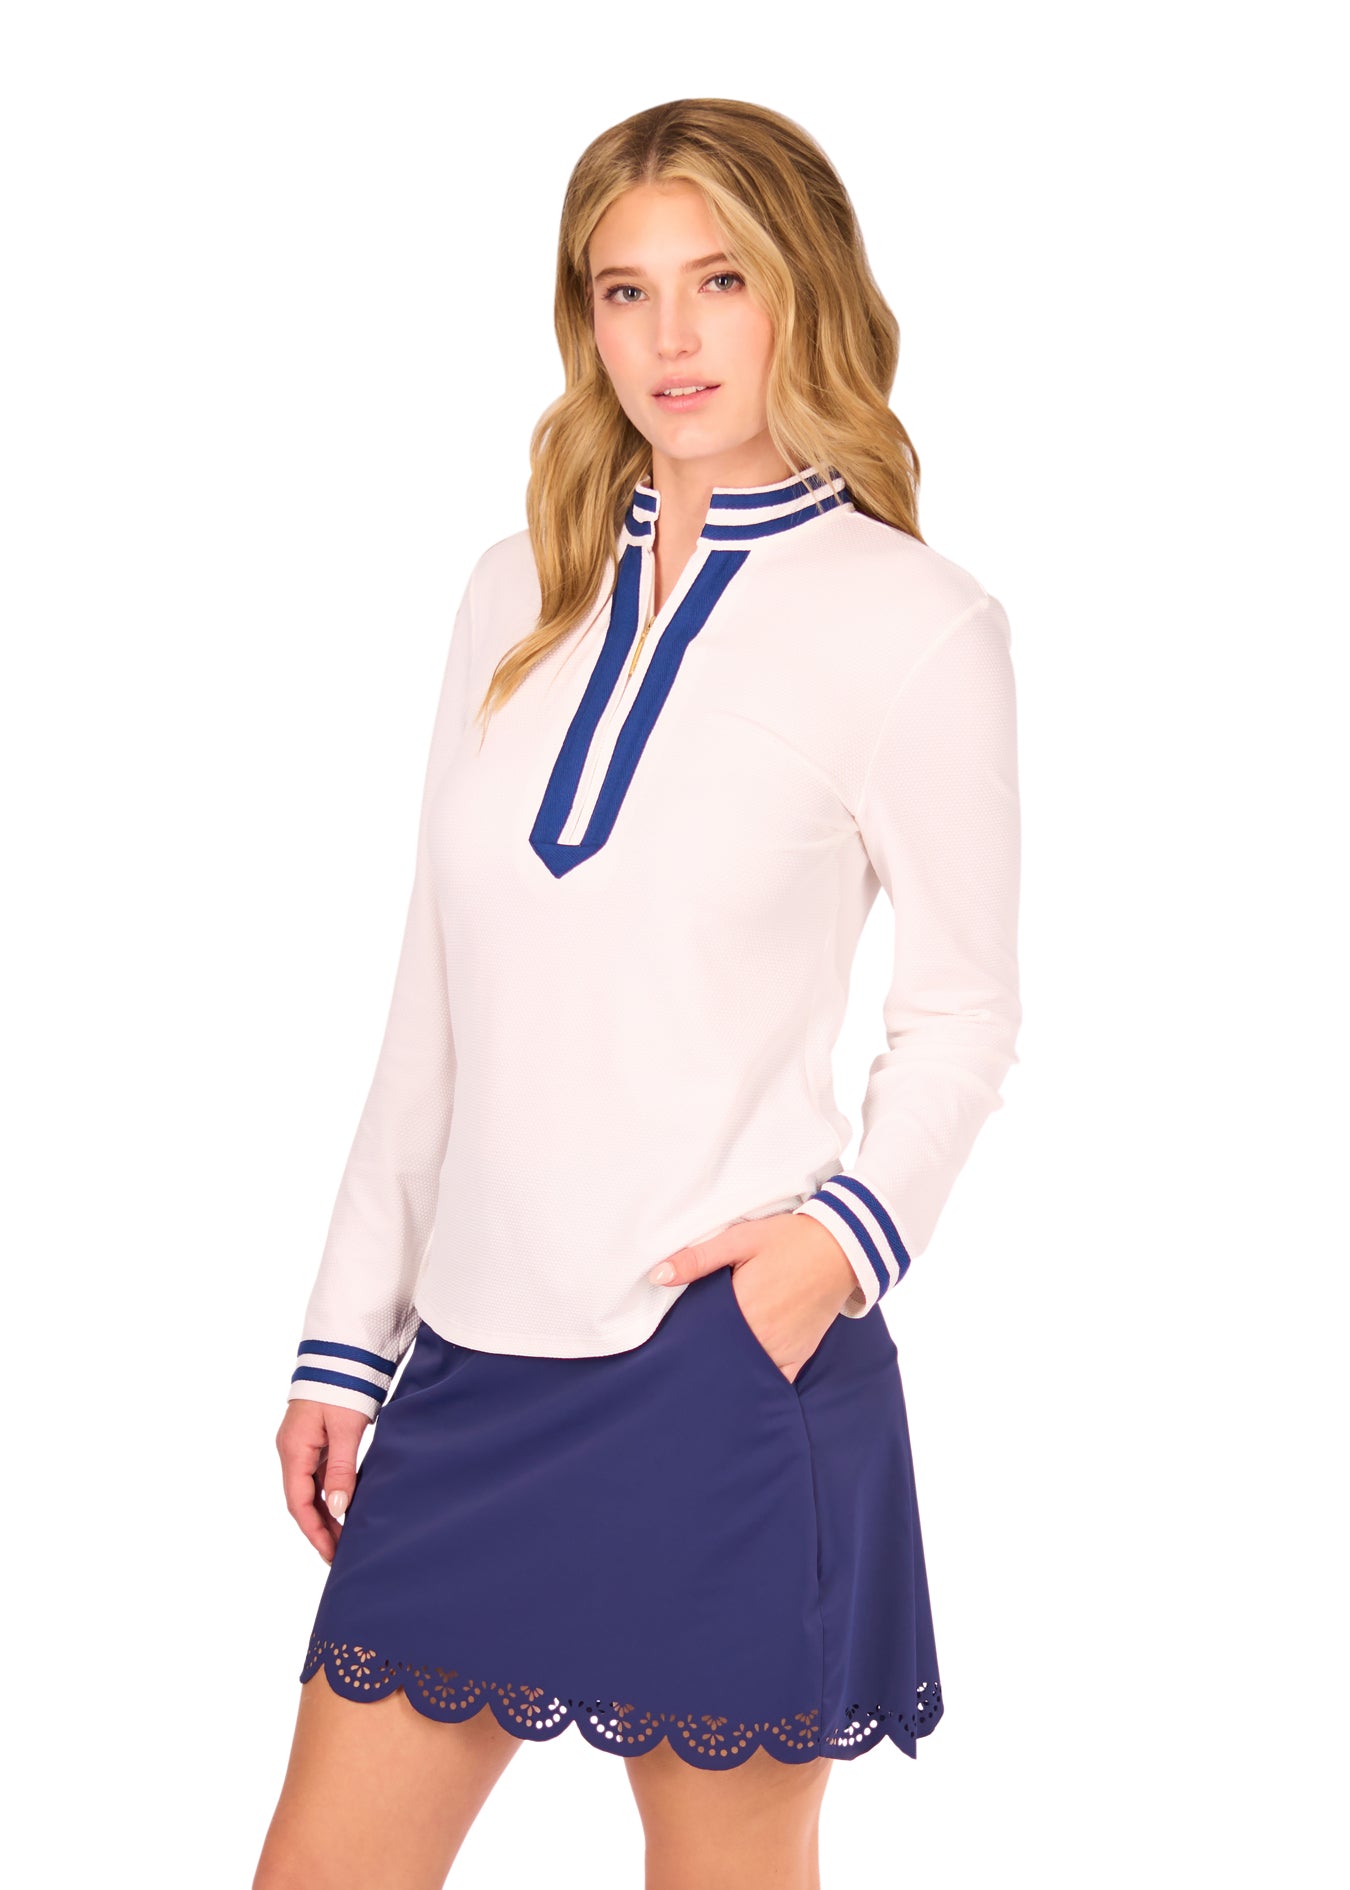 Side of Woman in White Collared 1/4 Zip and Navy Scallop Skort